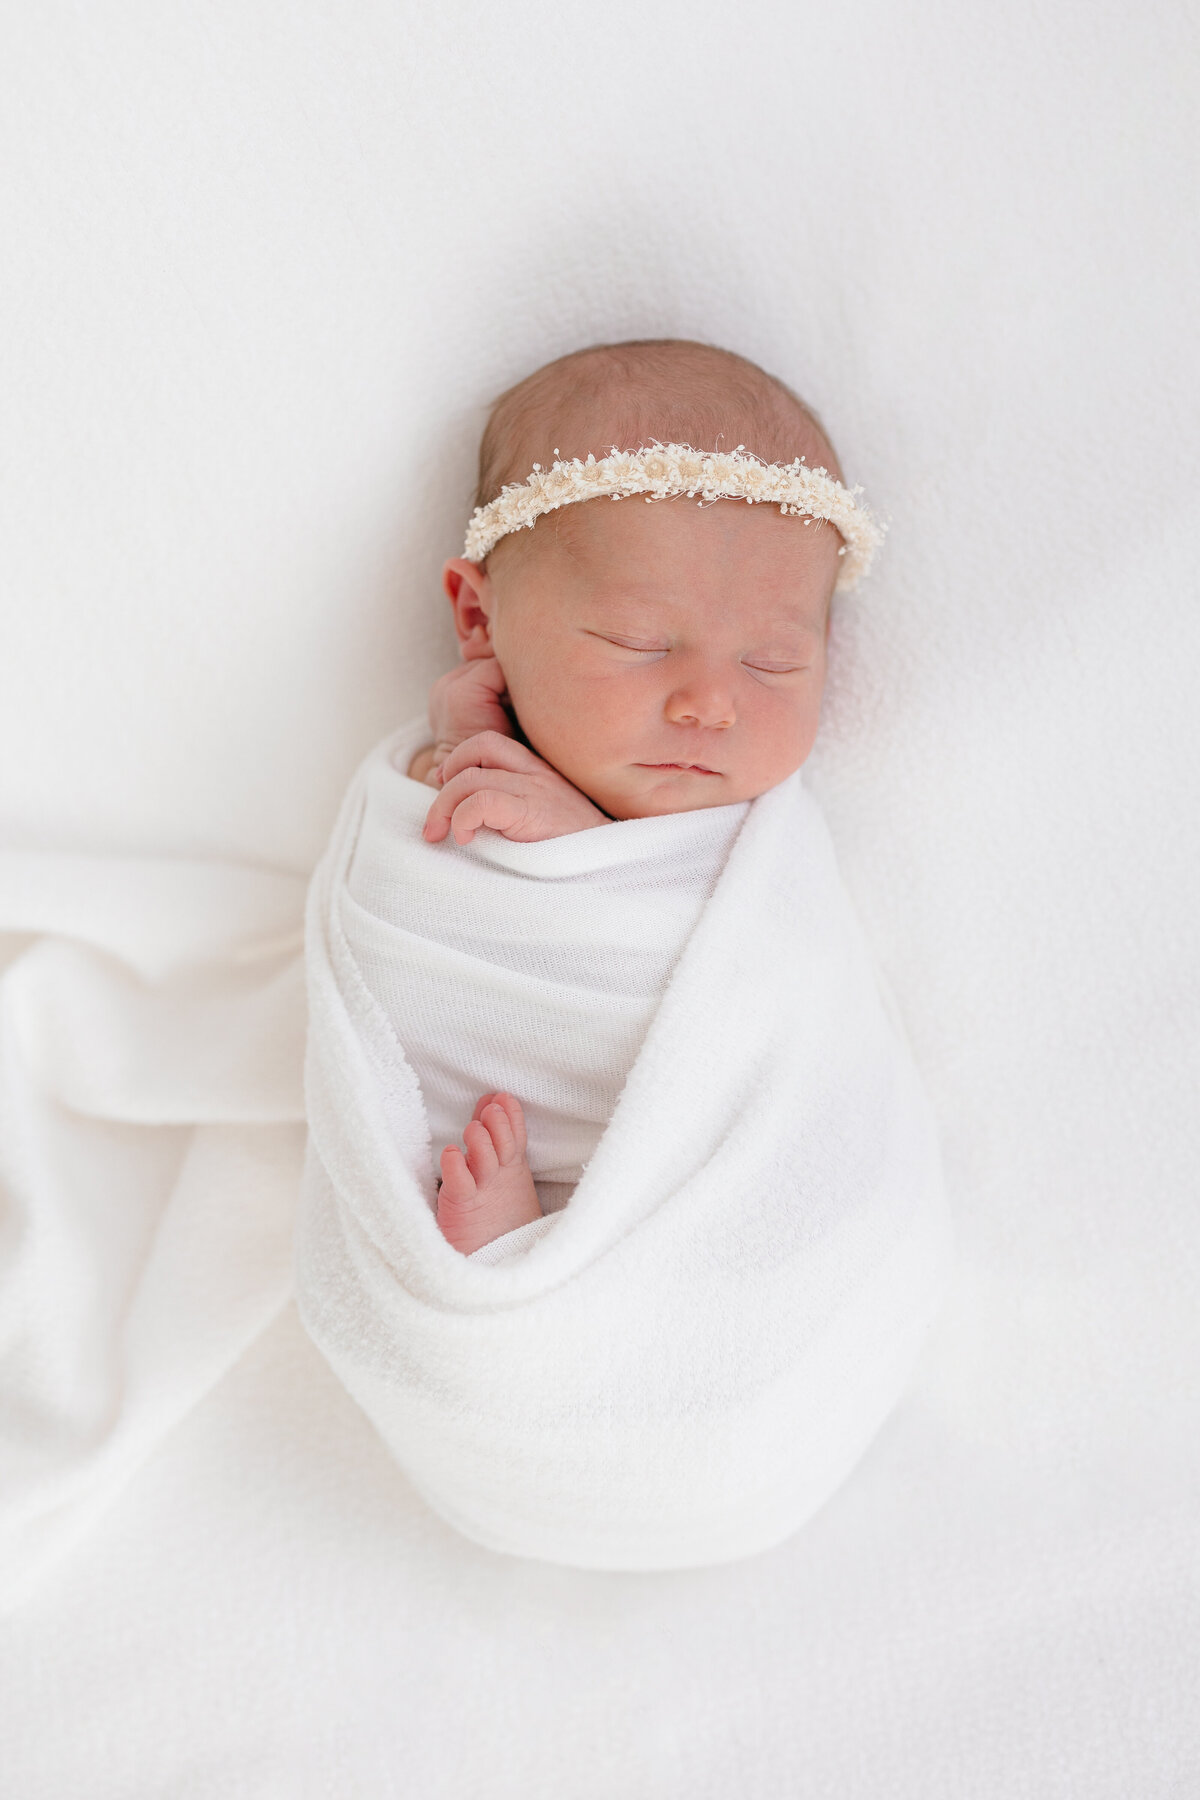 Newborn baby girl wrapped in a white swaddle with her hands gently touching her cheek